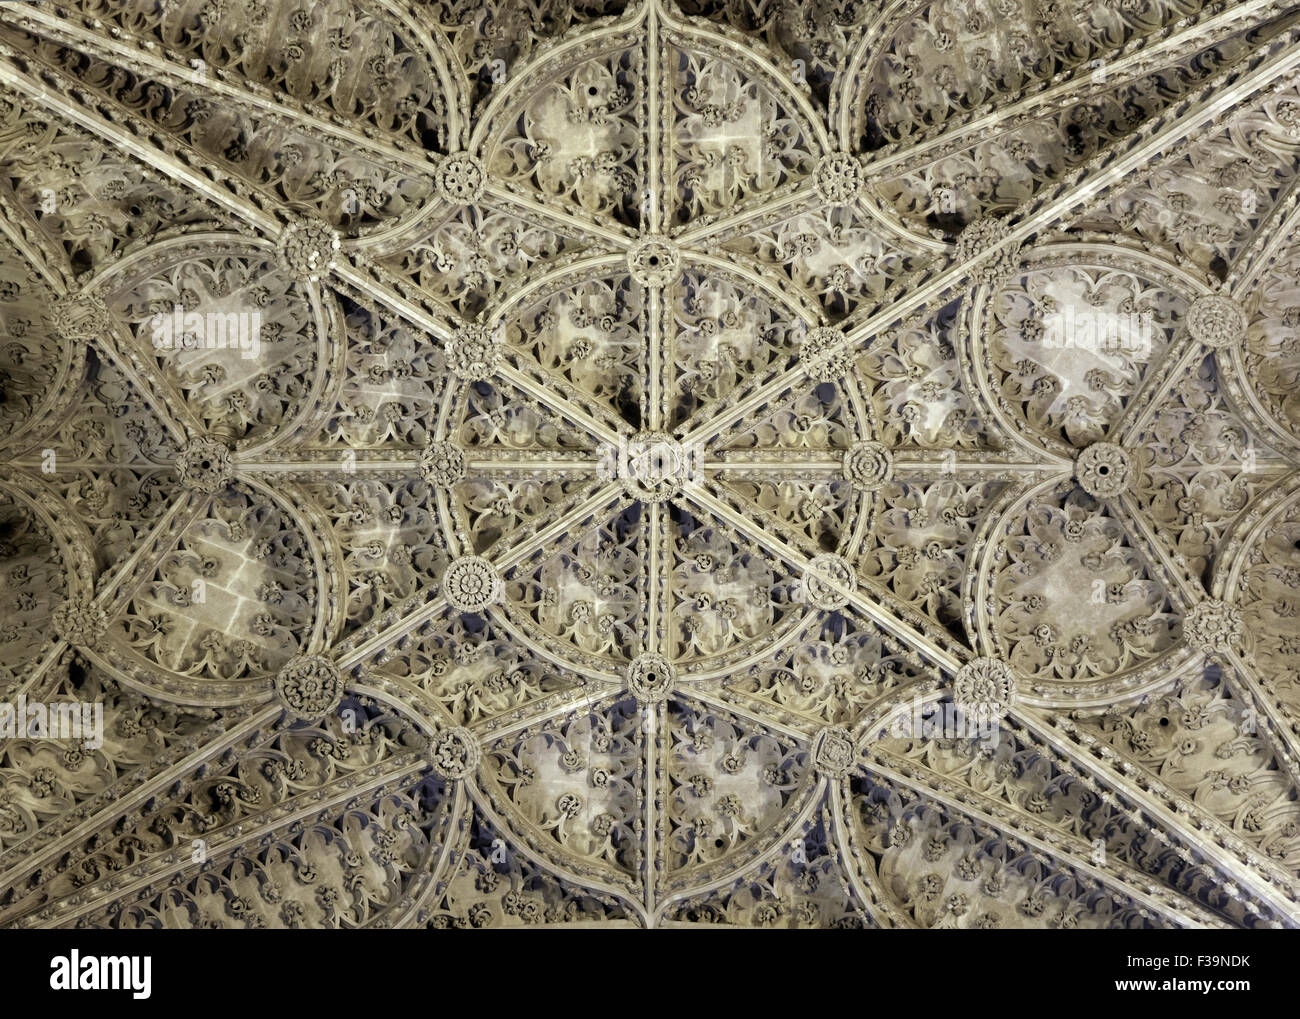 Ceiling of Seville cathedral, Spain, view from below Stock Photo